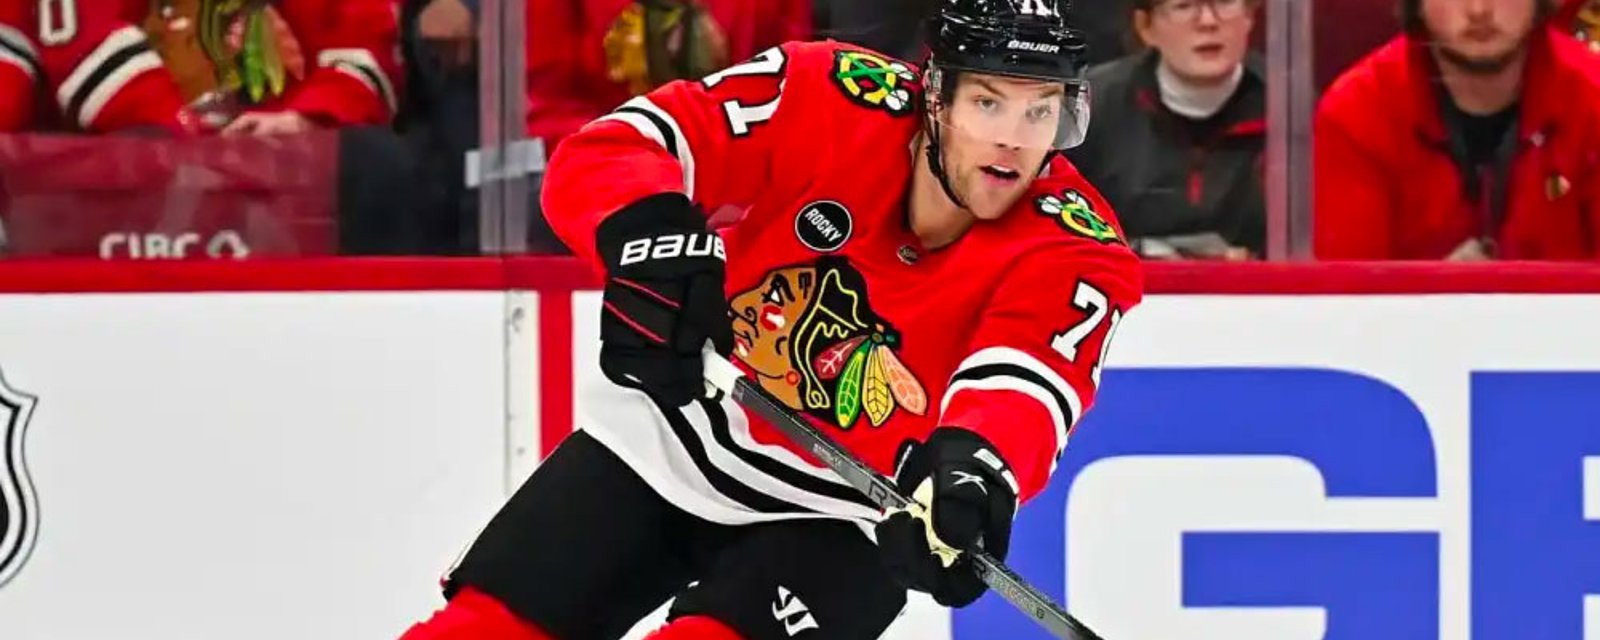 Blackhawks make a call on Taylor Hall ahead of game against Leafs this evening